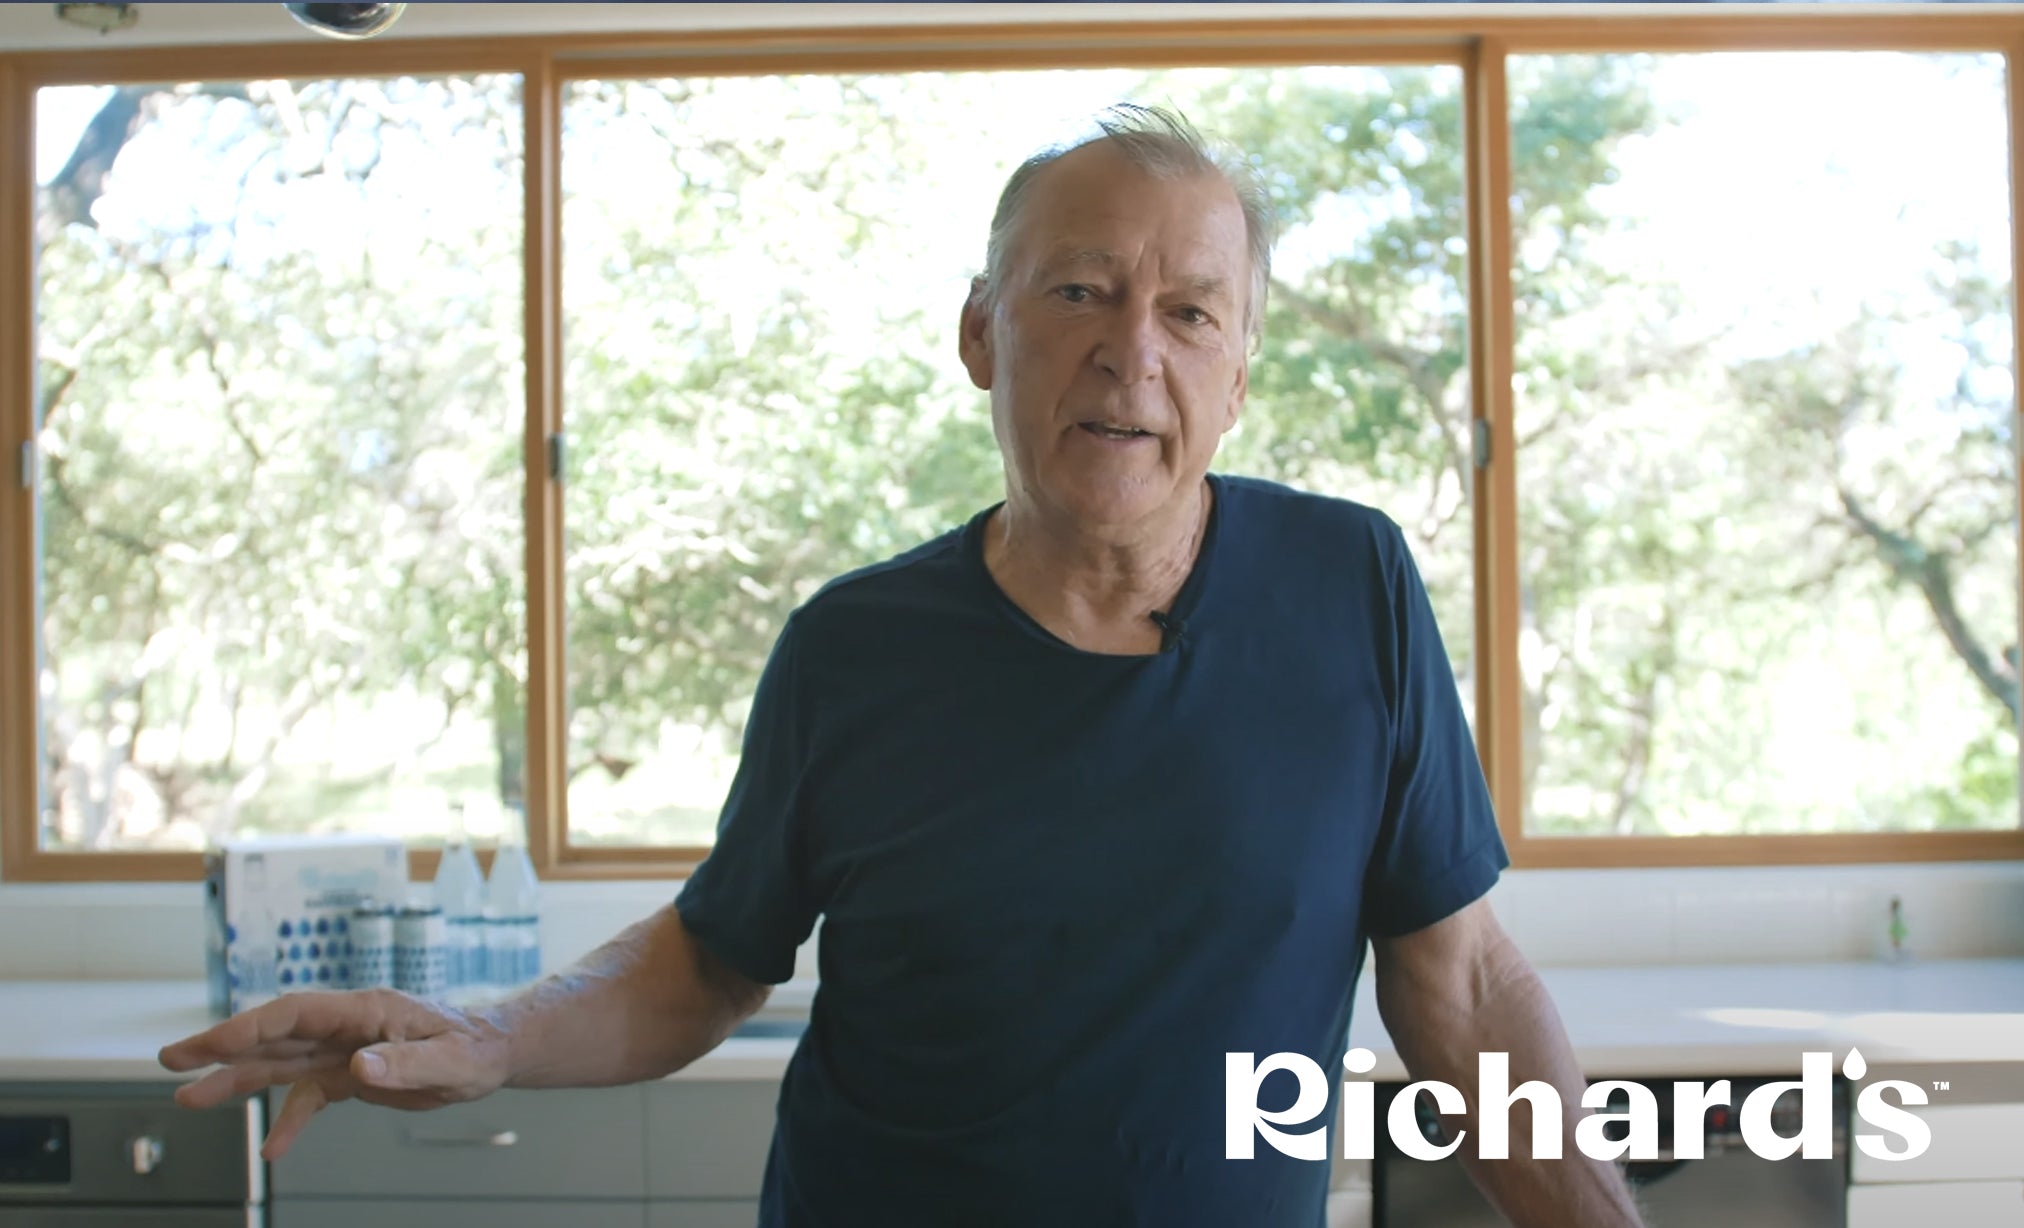 Load video: We’re happy to have Richard here to share a few facts from being the first person to legally bottle rainwater, to the first to make it fizz, this man has truly changed the world of drinking water — for the better!